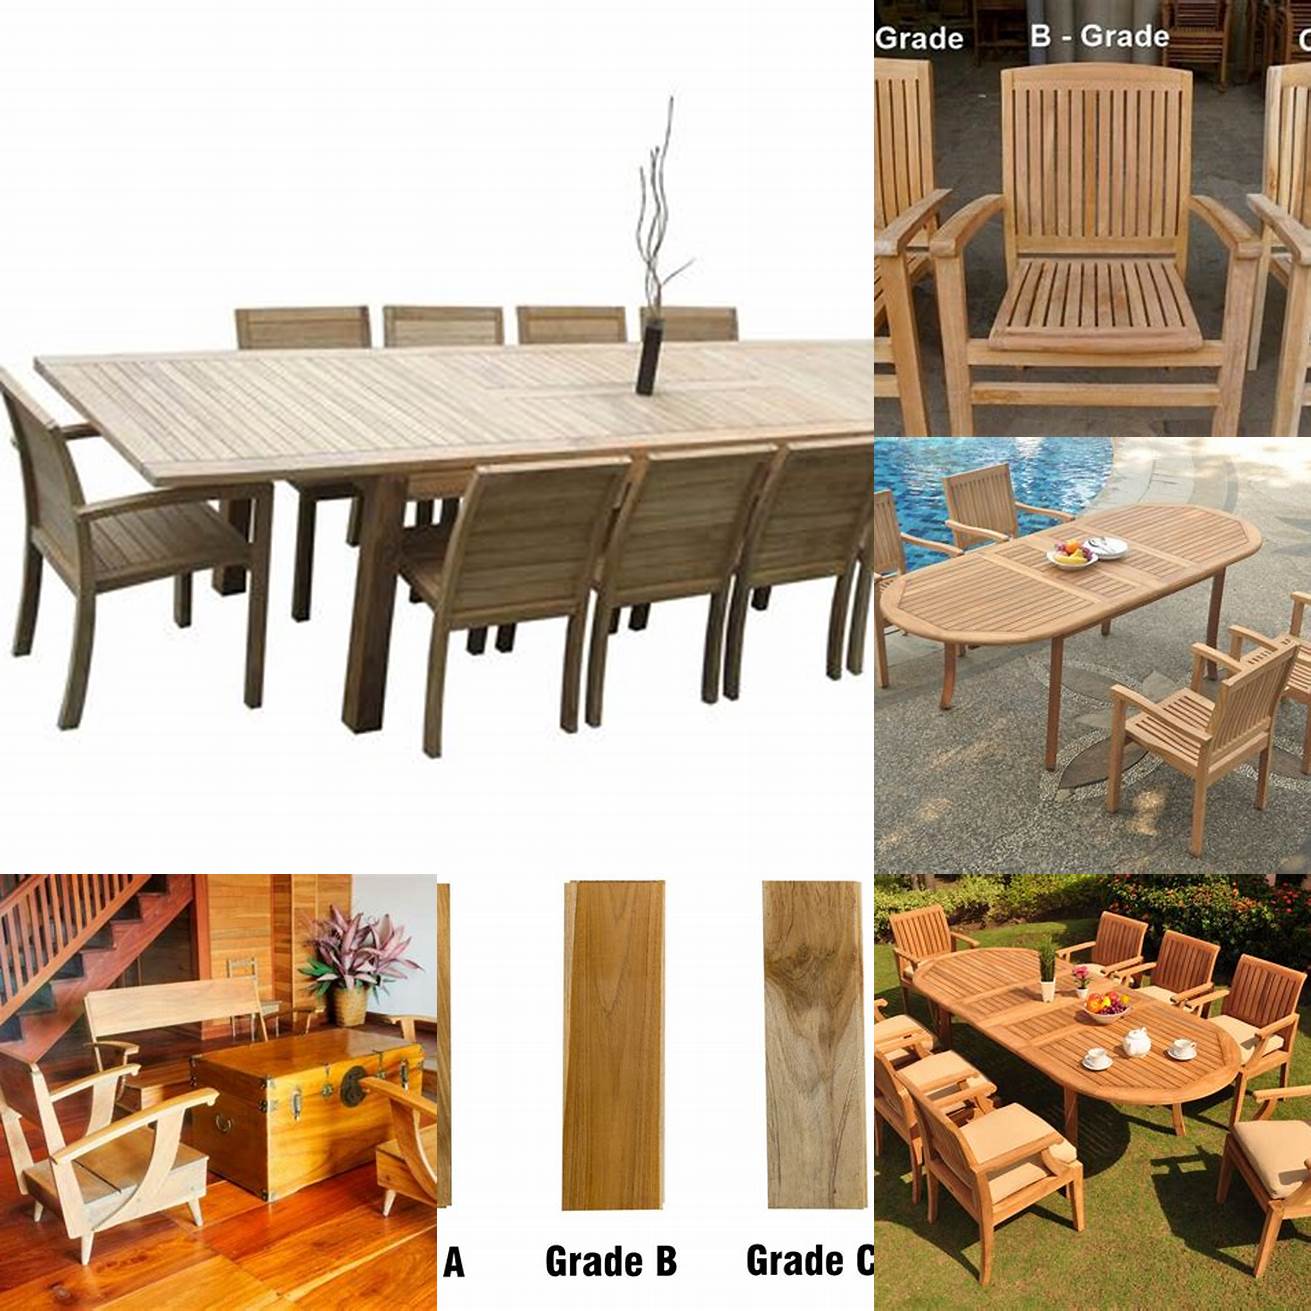 Pictures of Different Grades of Teak